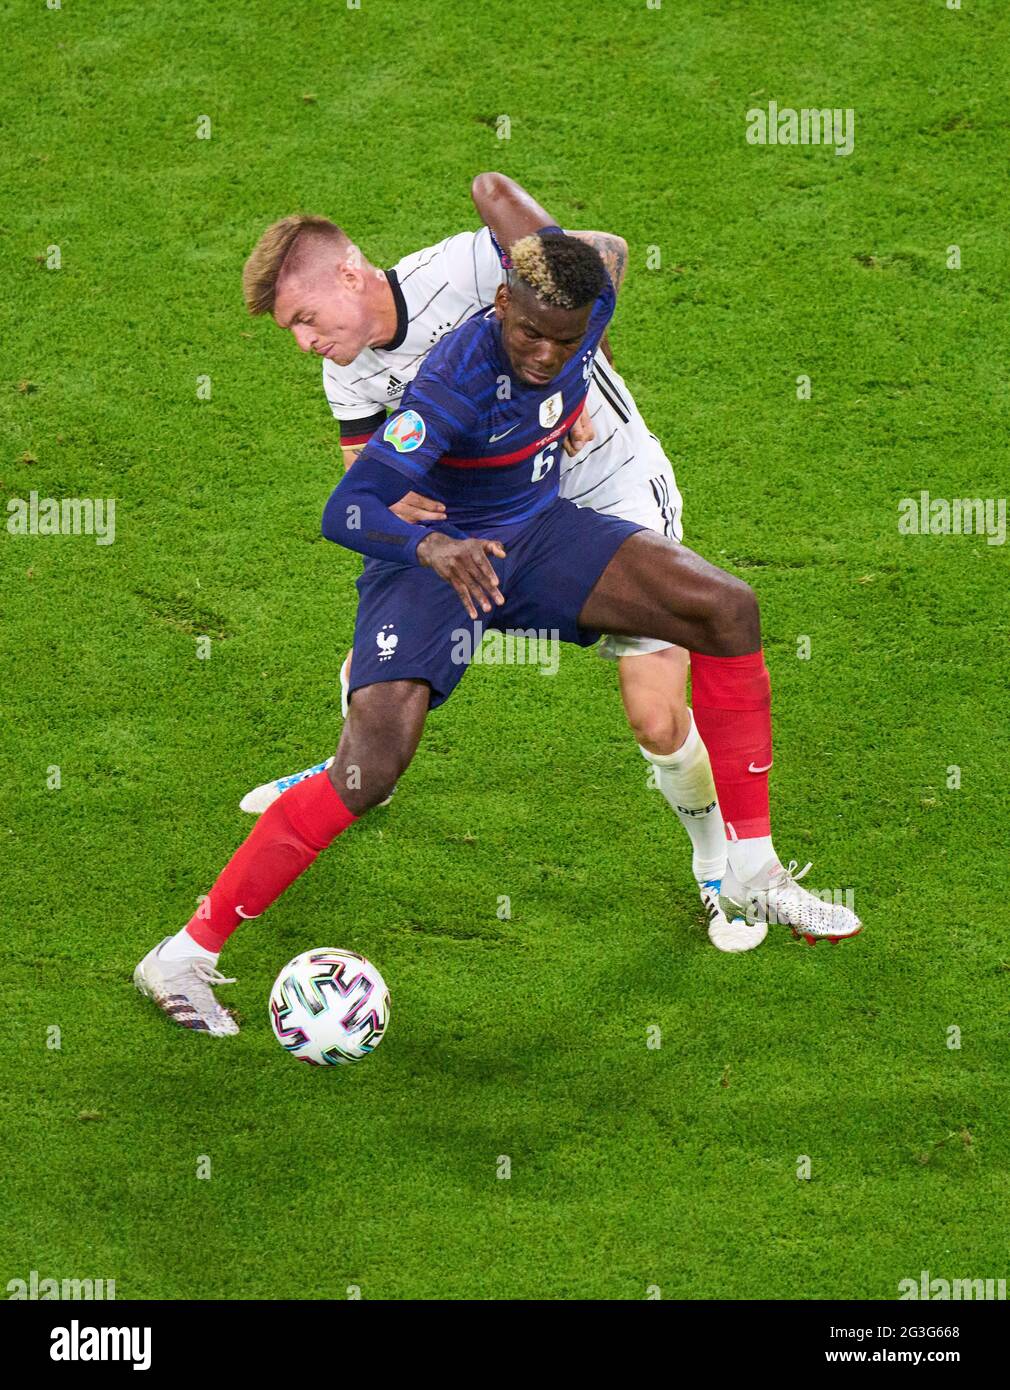 Toni Kroos, DFB 8  compete for the ball, tackling, duel, header, zweikampf, action, fight against Paul POGBA, FRA 6  in the Group F match FRANCE - GERMANY  1-0 at the football UEFA European Championships 2020 in Season 2020/2021 on June 15, 2021  in Munich, Germany. © Peter Schatz / Alamy Live News Stock Photo